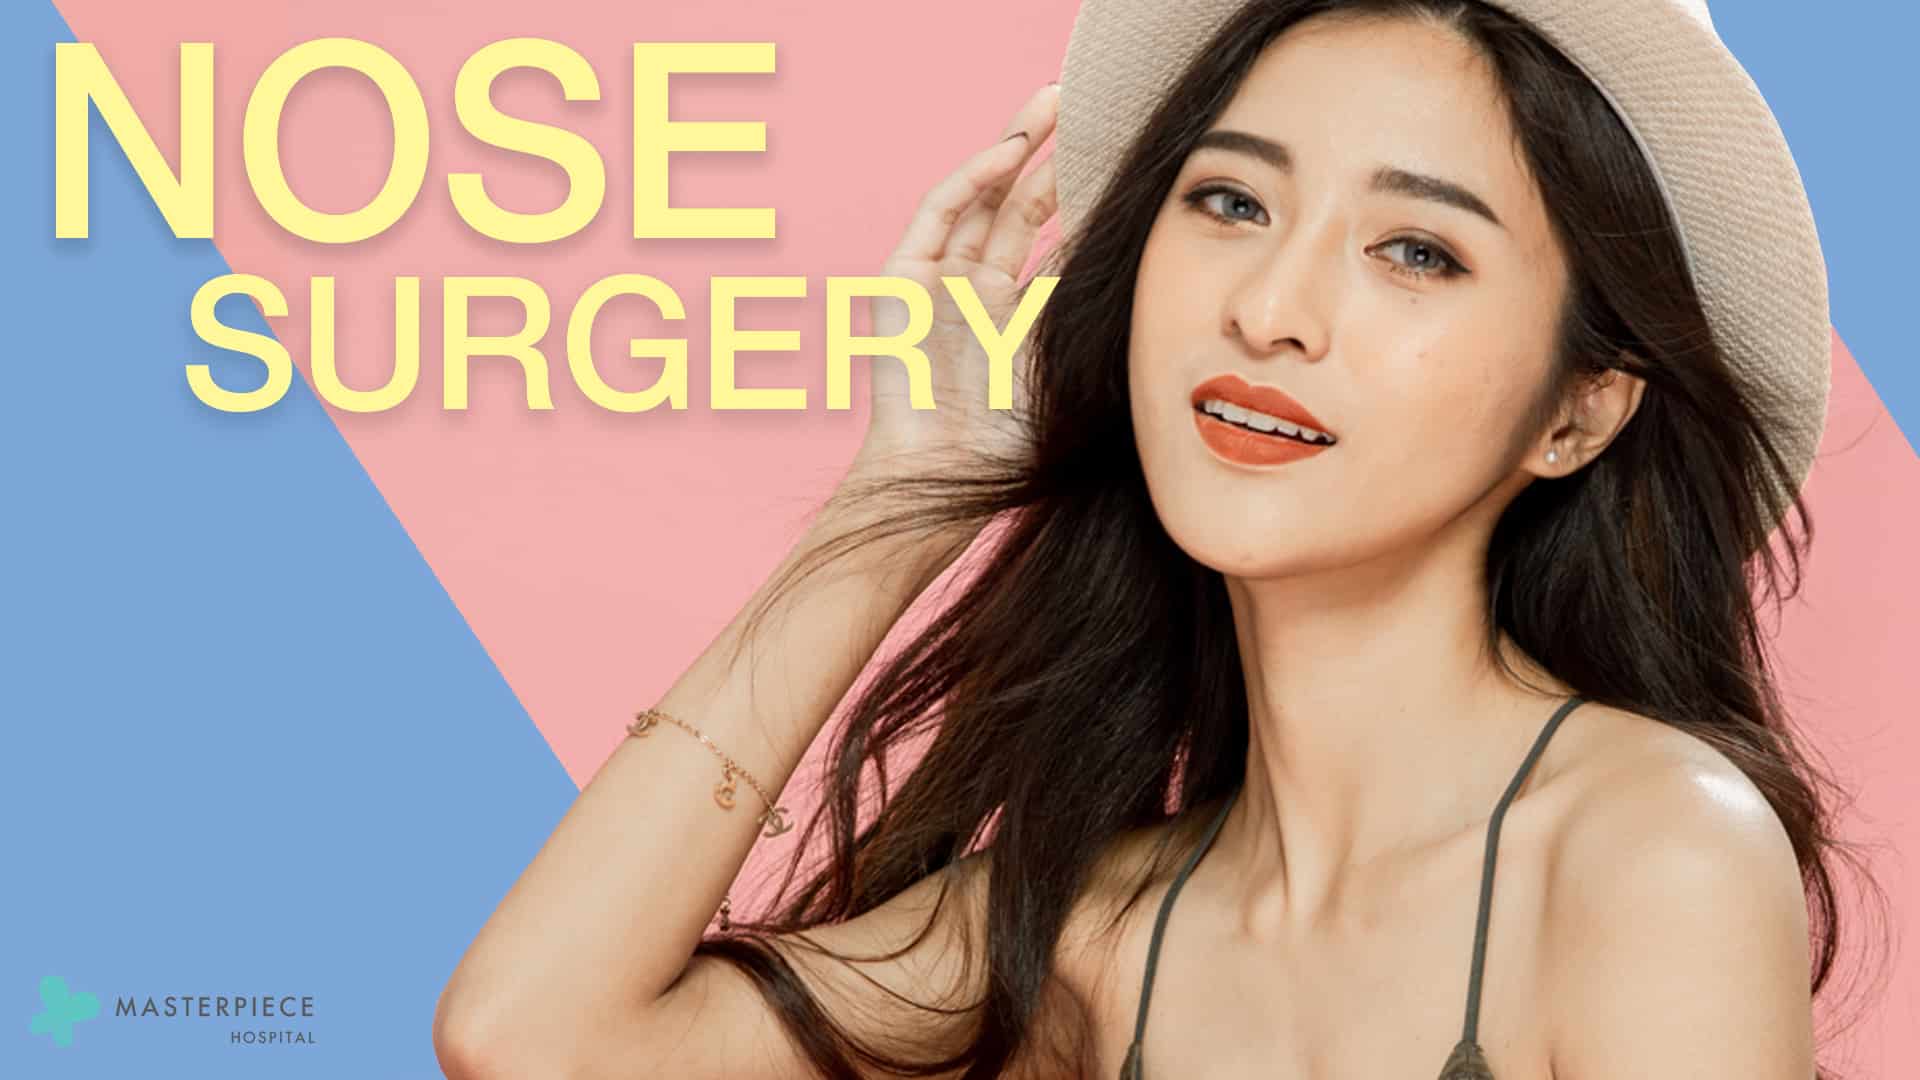 Nose sugery